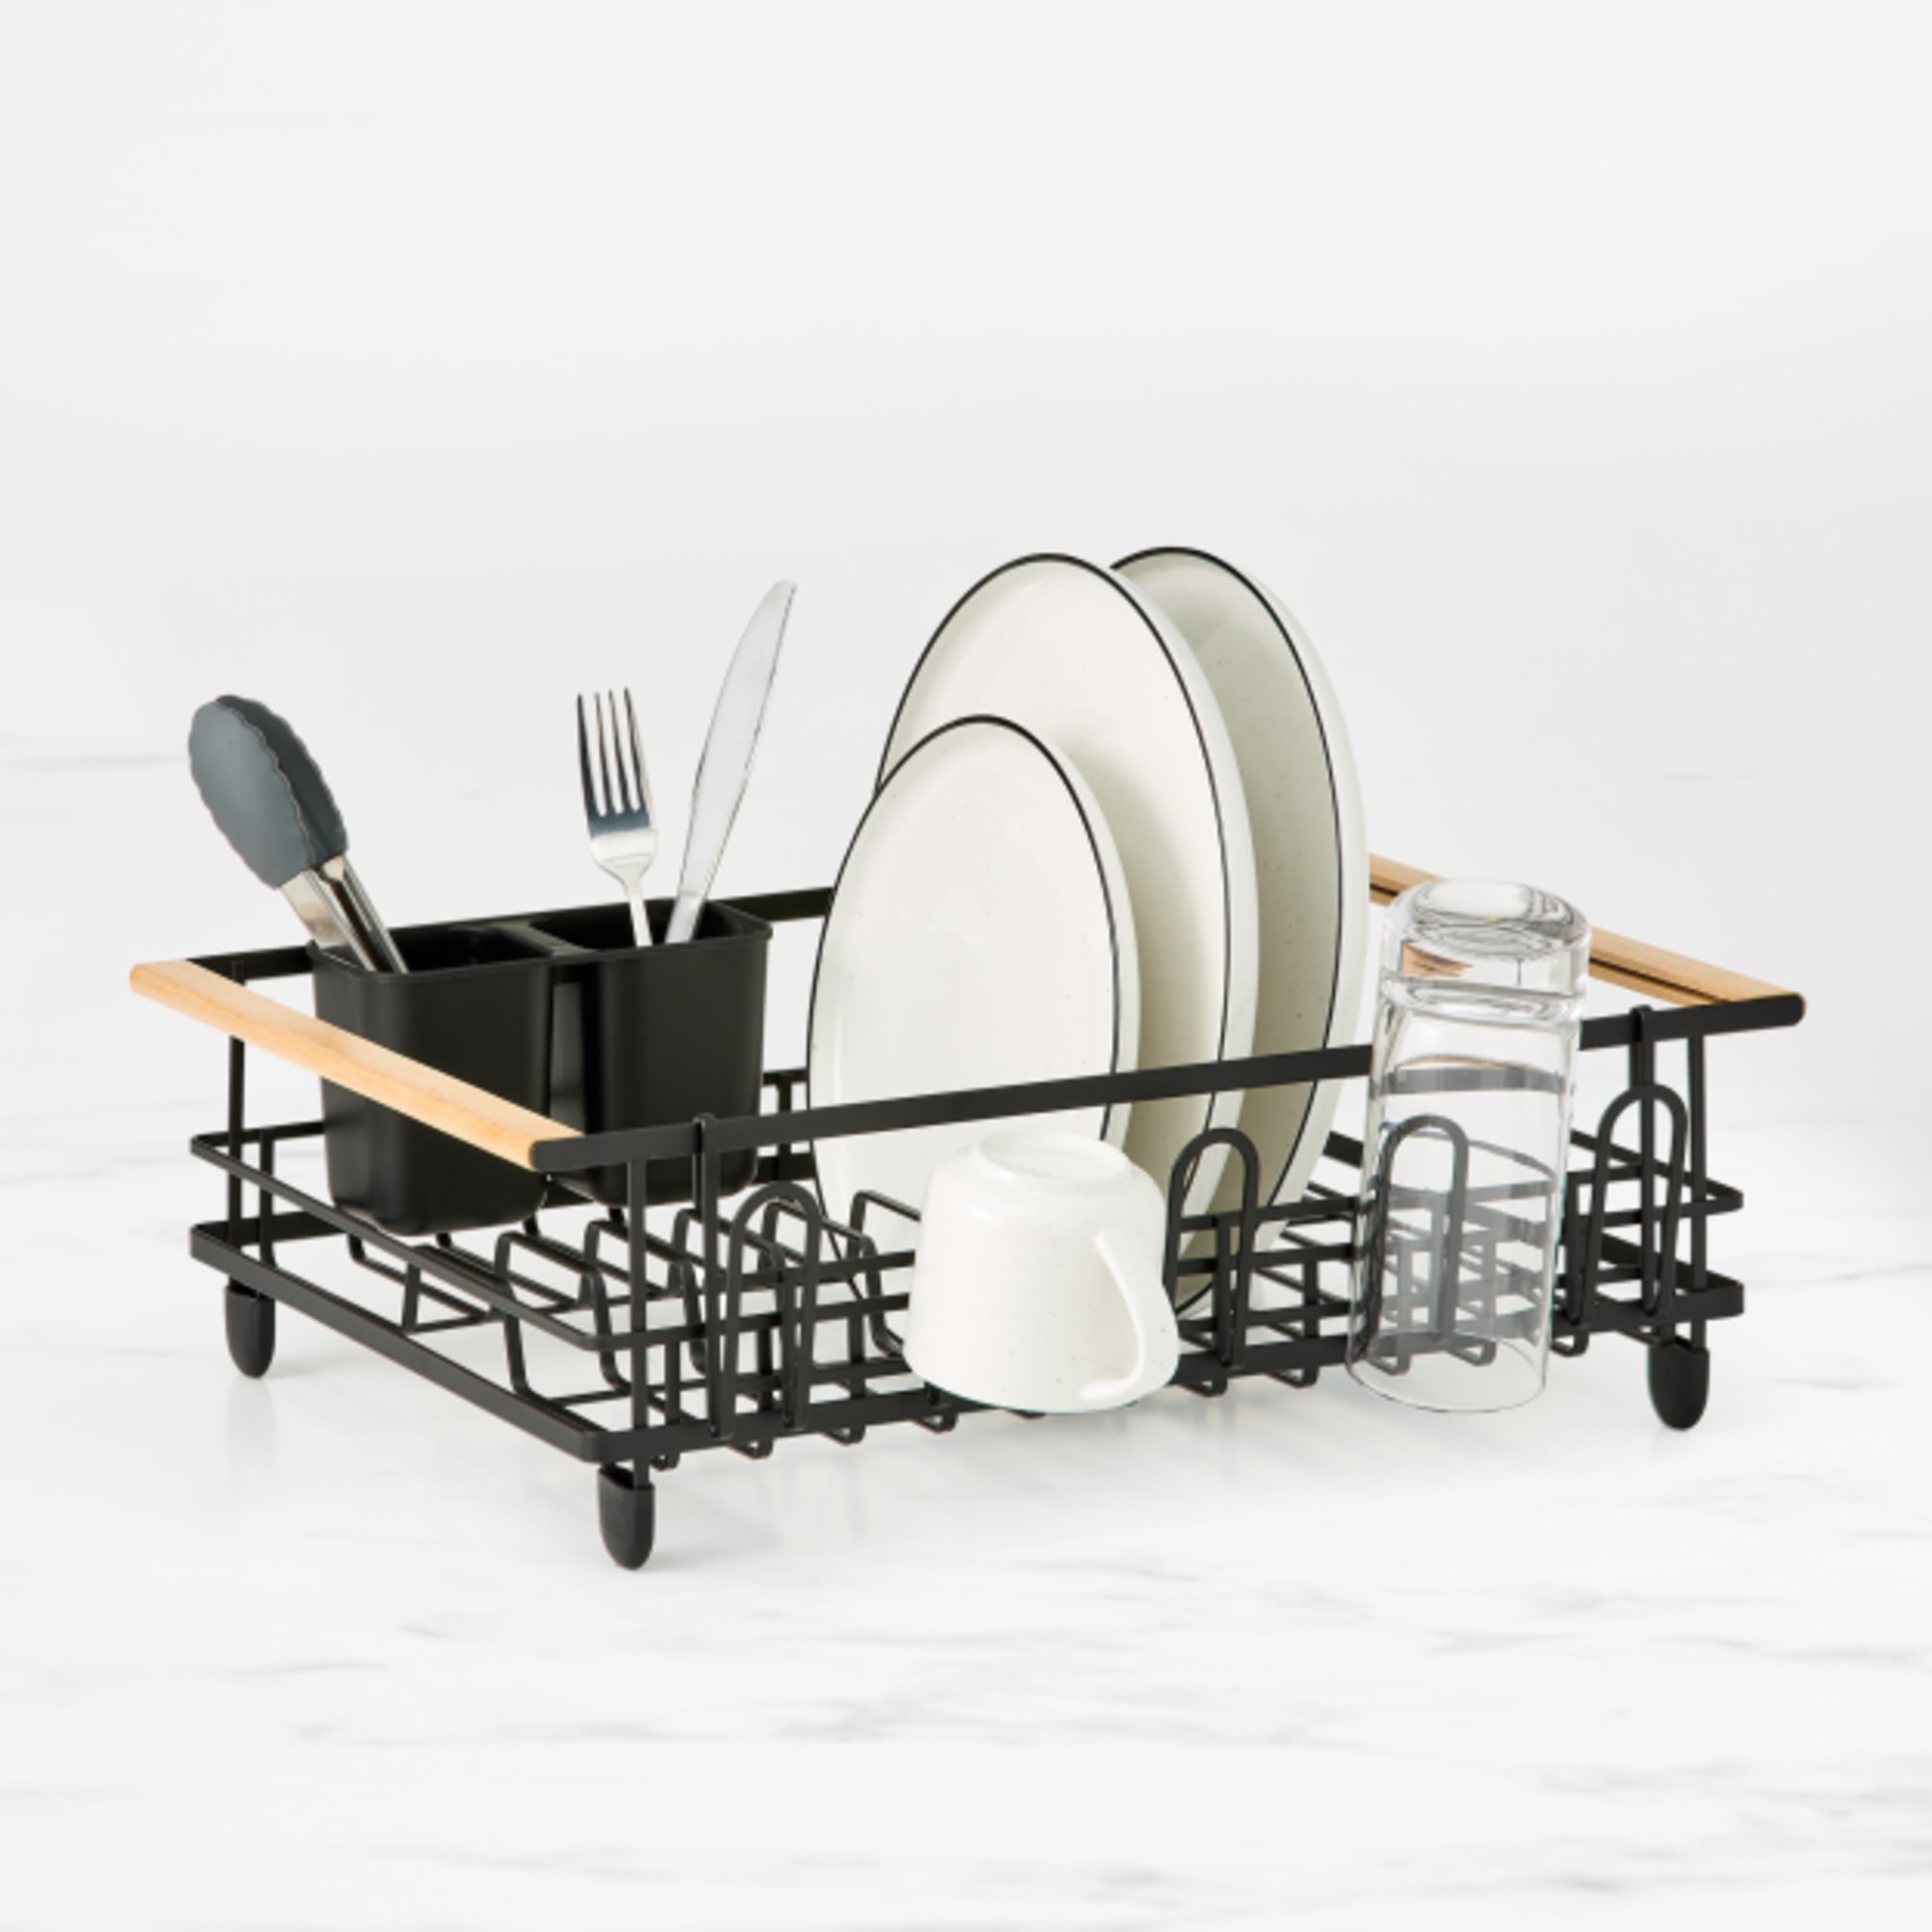 https://res.cloudinary.com/kitchenwarehouse/image/upload/c_fill,g_face,w_625/f_auto/t_PDP_2000x2000/Kitchen%20Warehouse%20Images%20/Kitchen-Pro-Tidy-Dish-Rack-with-Wooden-Handle-Black_Hero_1.jpg